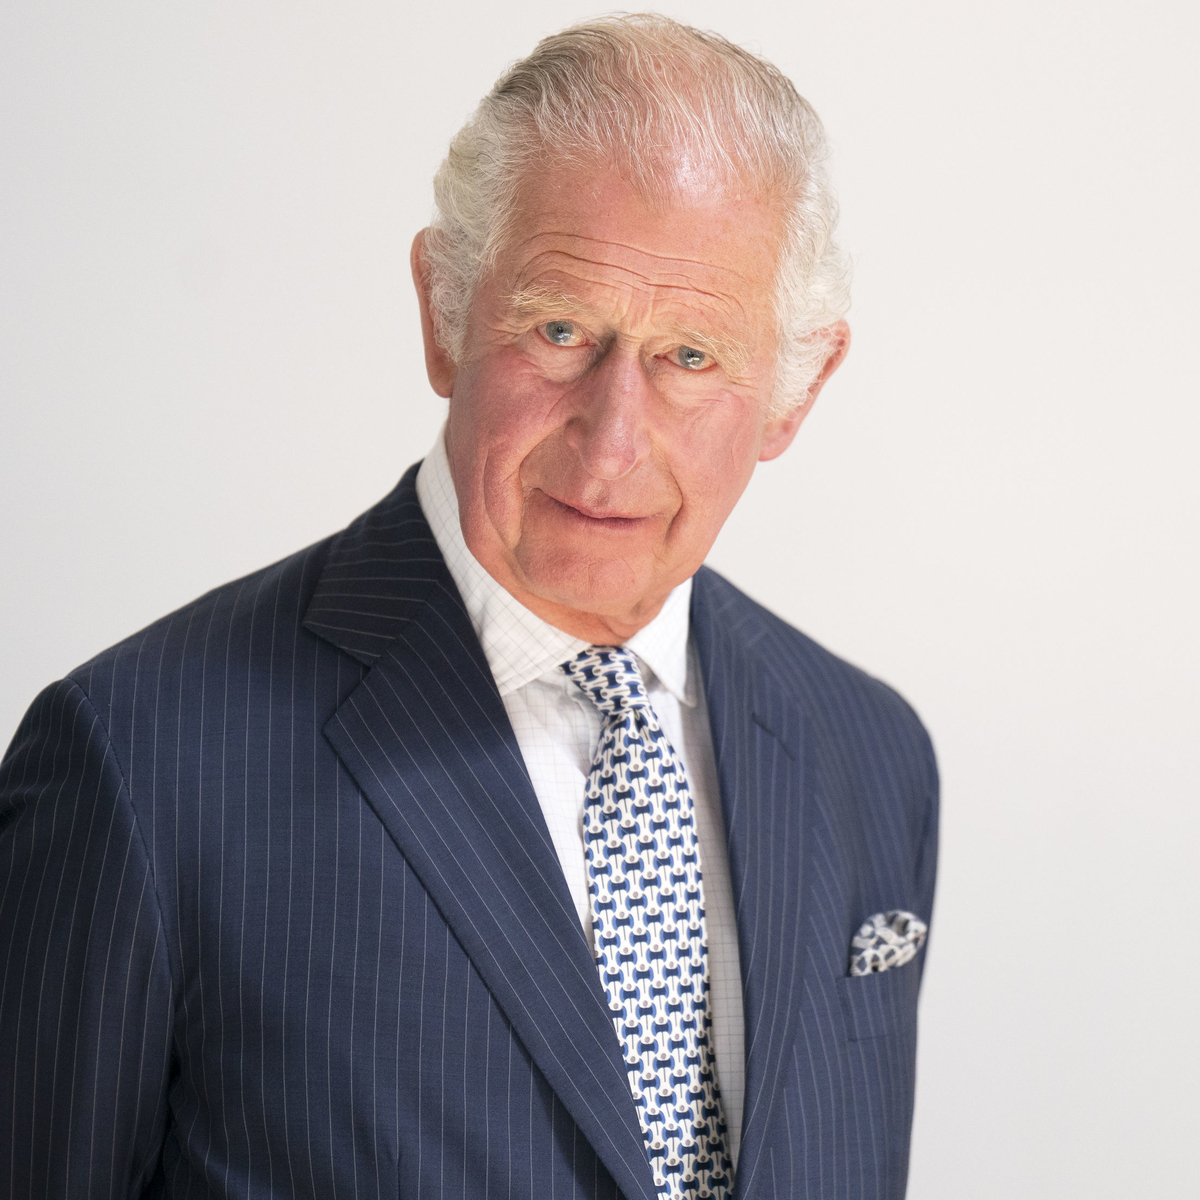 King Charles III Shares His “Great Sadness” After Missing Royal Event